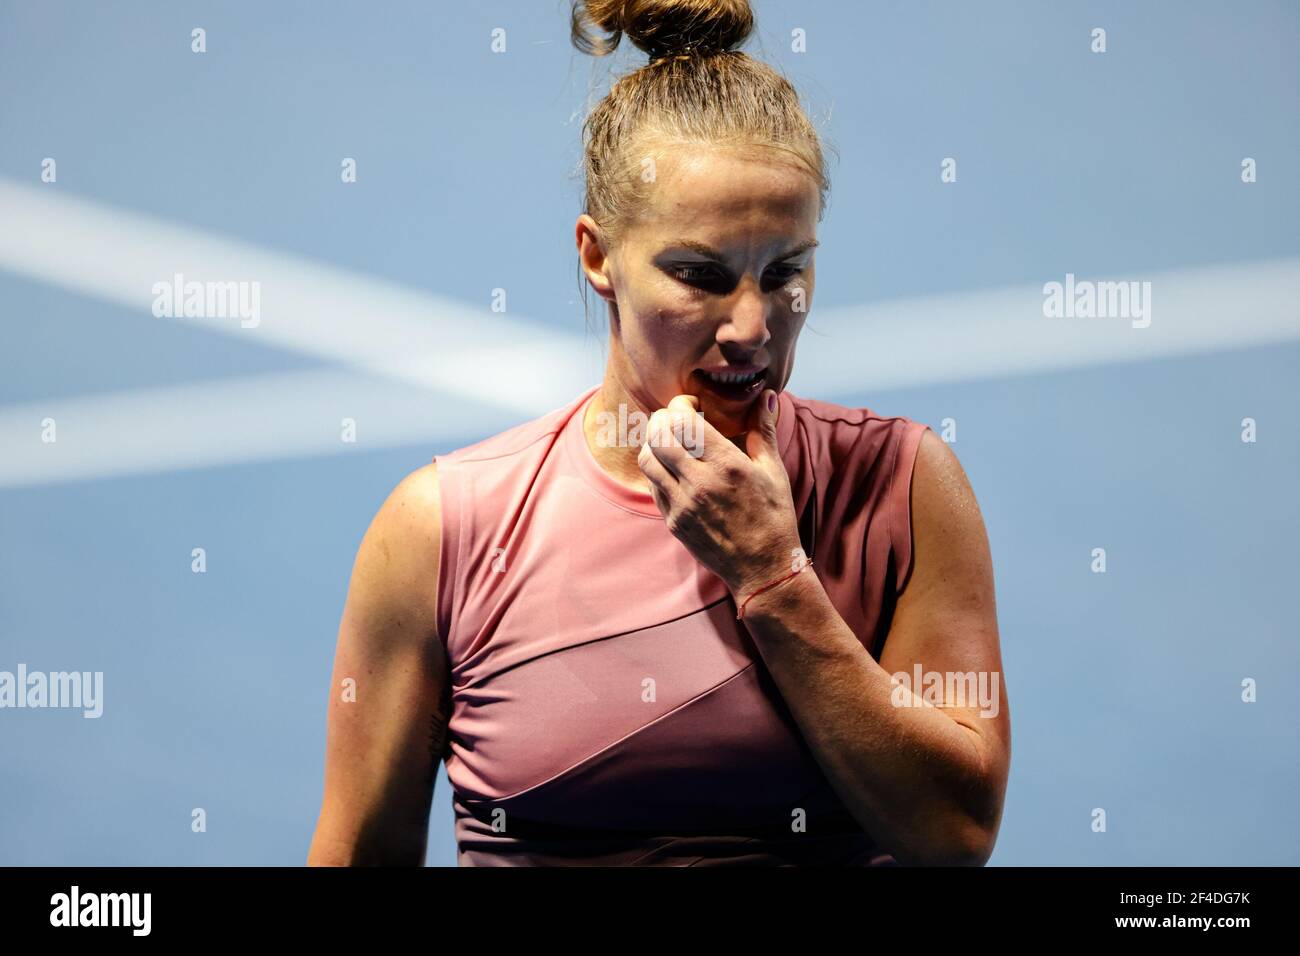 ST PETERSBURG, RUSSIA - MARCH 20: Svetlana Kuznetsova of Russia during her match against Daria Kasatkina of Russia during the semifinals of the 2021 St Petersburg Ladies Trophy, WTA 500 tennis tournament at Sibur Arena on March 20, 2021 in St Petersburg, Russia (Photo by Anatolij Medved/Orange Pictures)*** Local Caption *** Svetlana Kuznetsova Stock Photo